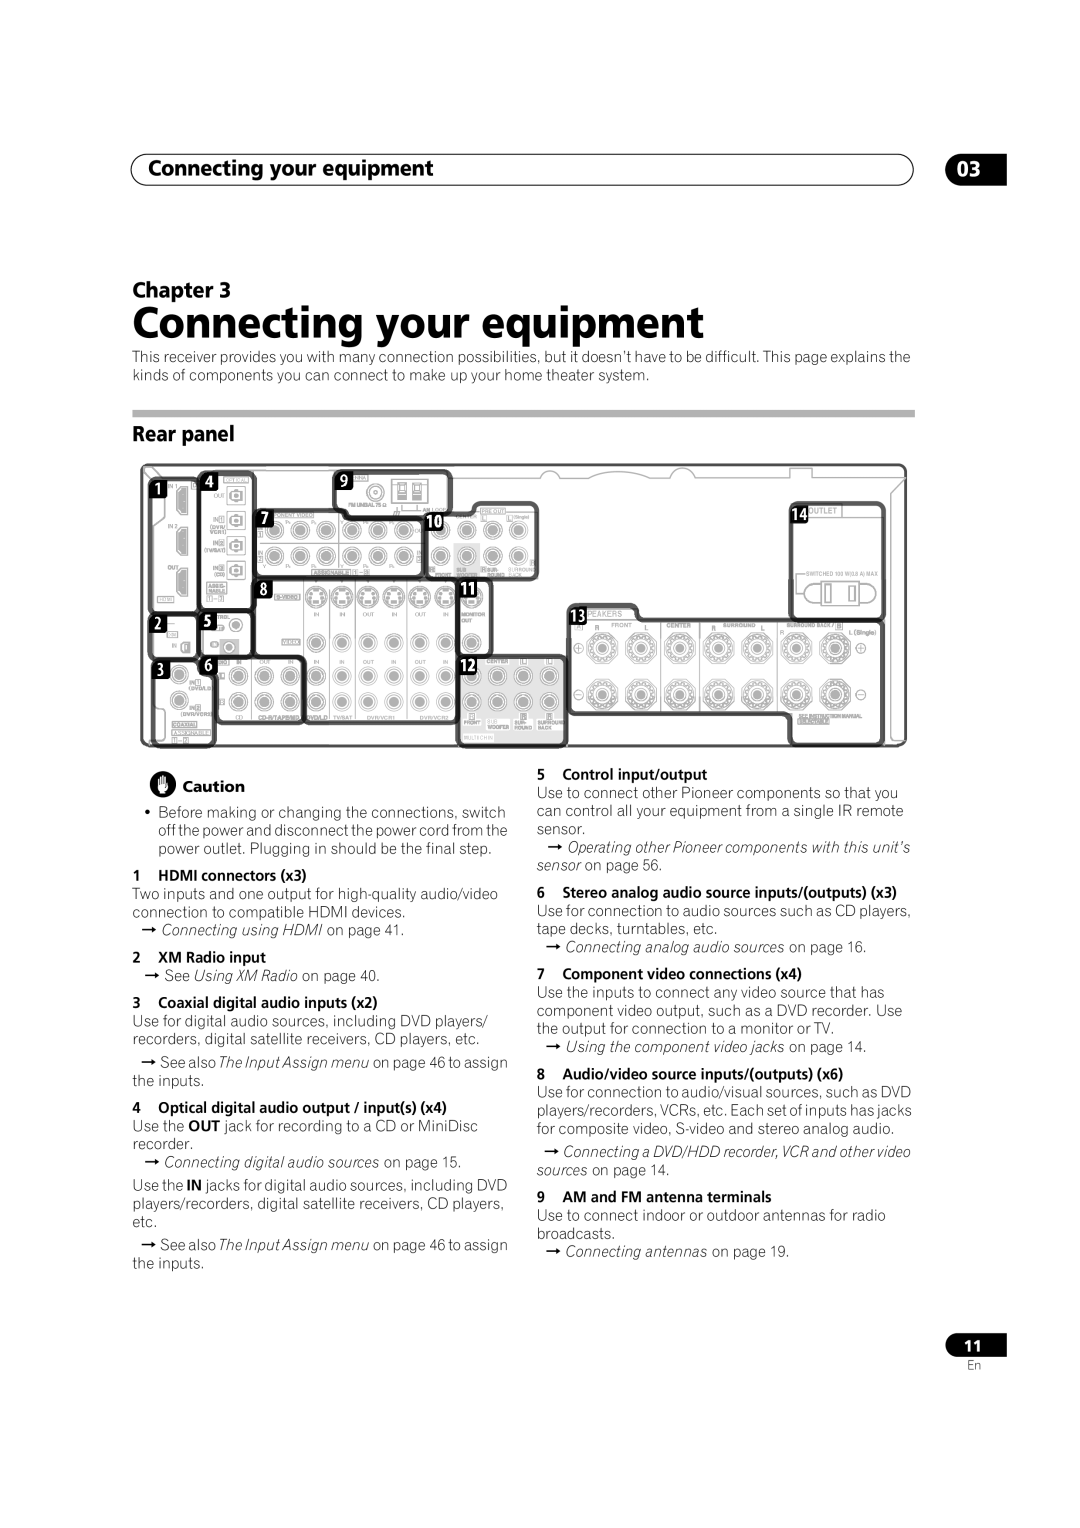 Pioneer VSX-1016TXV-K Connecting your equipment, Chapter, Rear panel, Connecting using HDMI on page, Outlet, Center L 